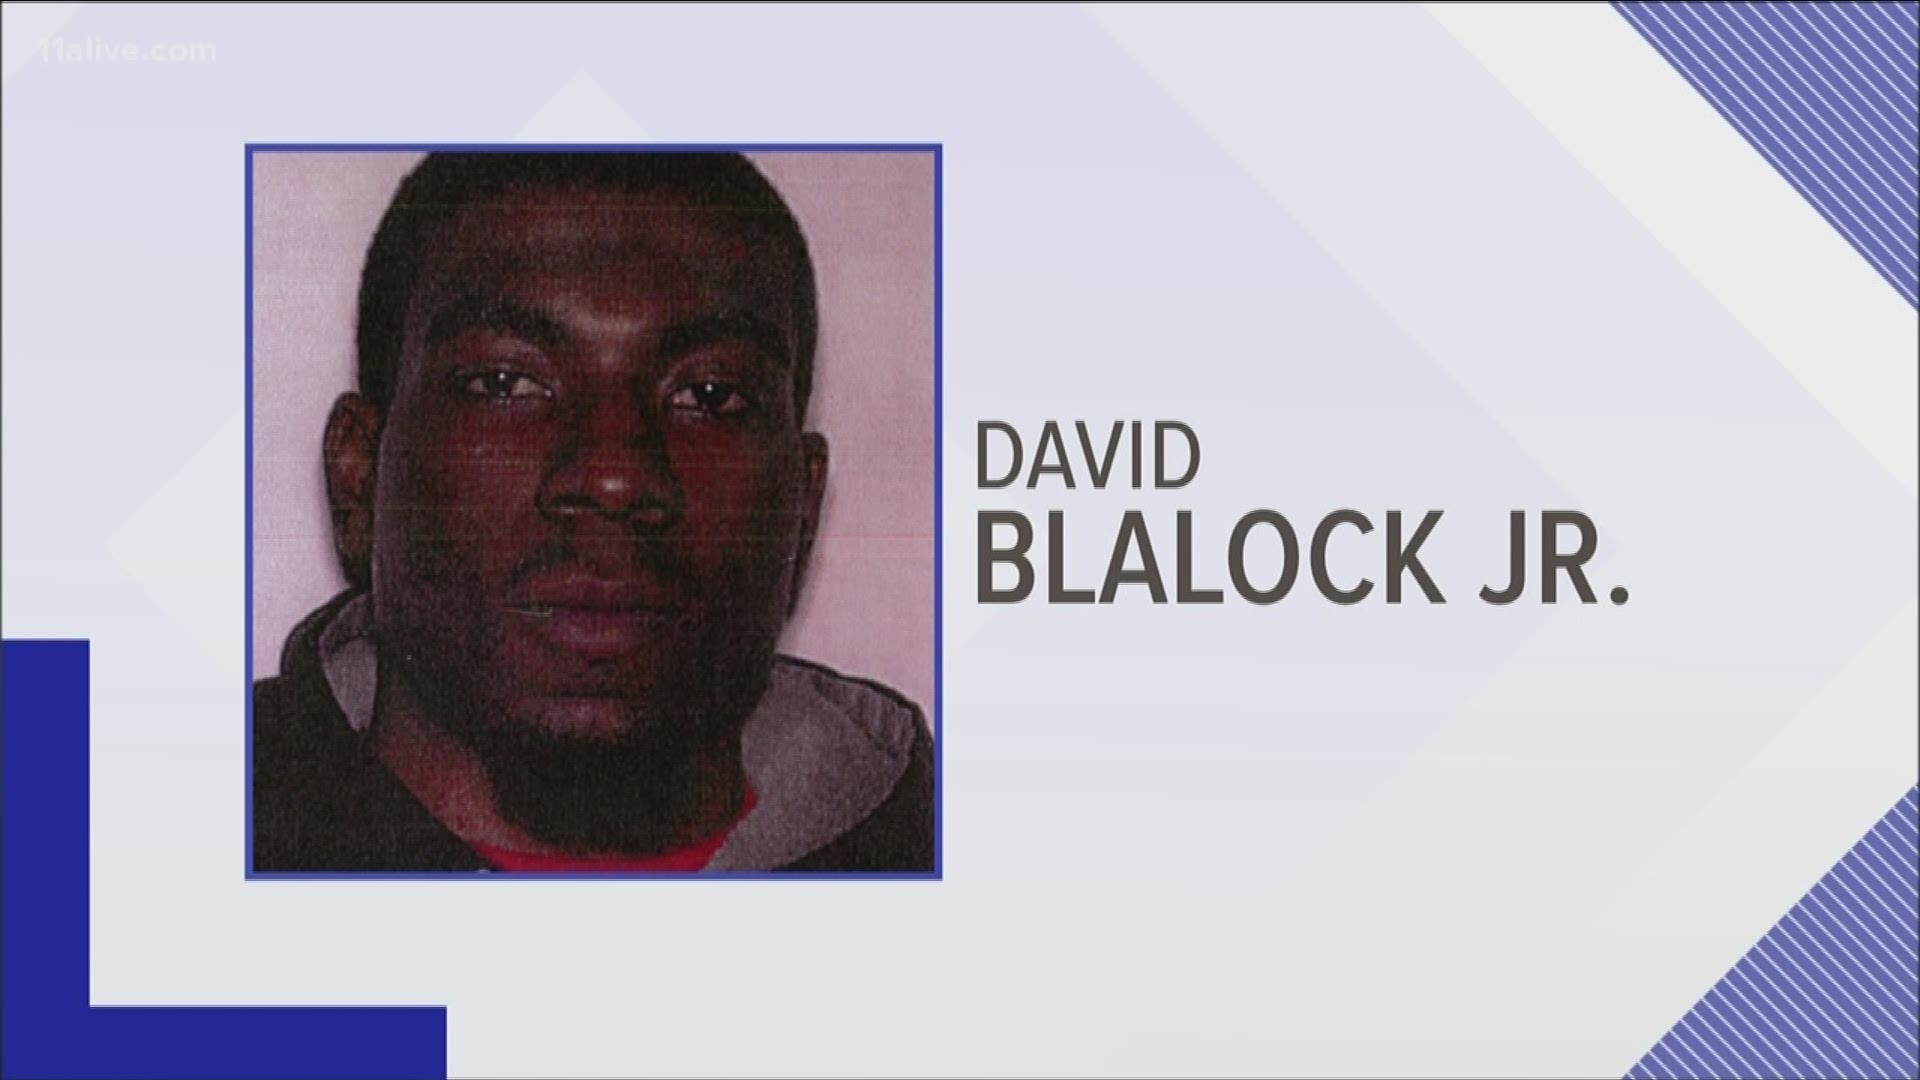 David Blalock Jr. is charged with murder and his father with hindering police and tampering with evidence.